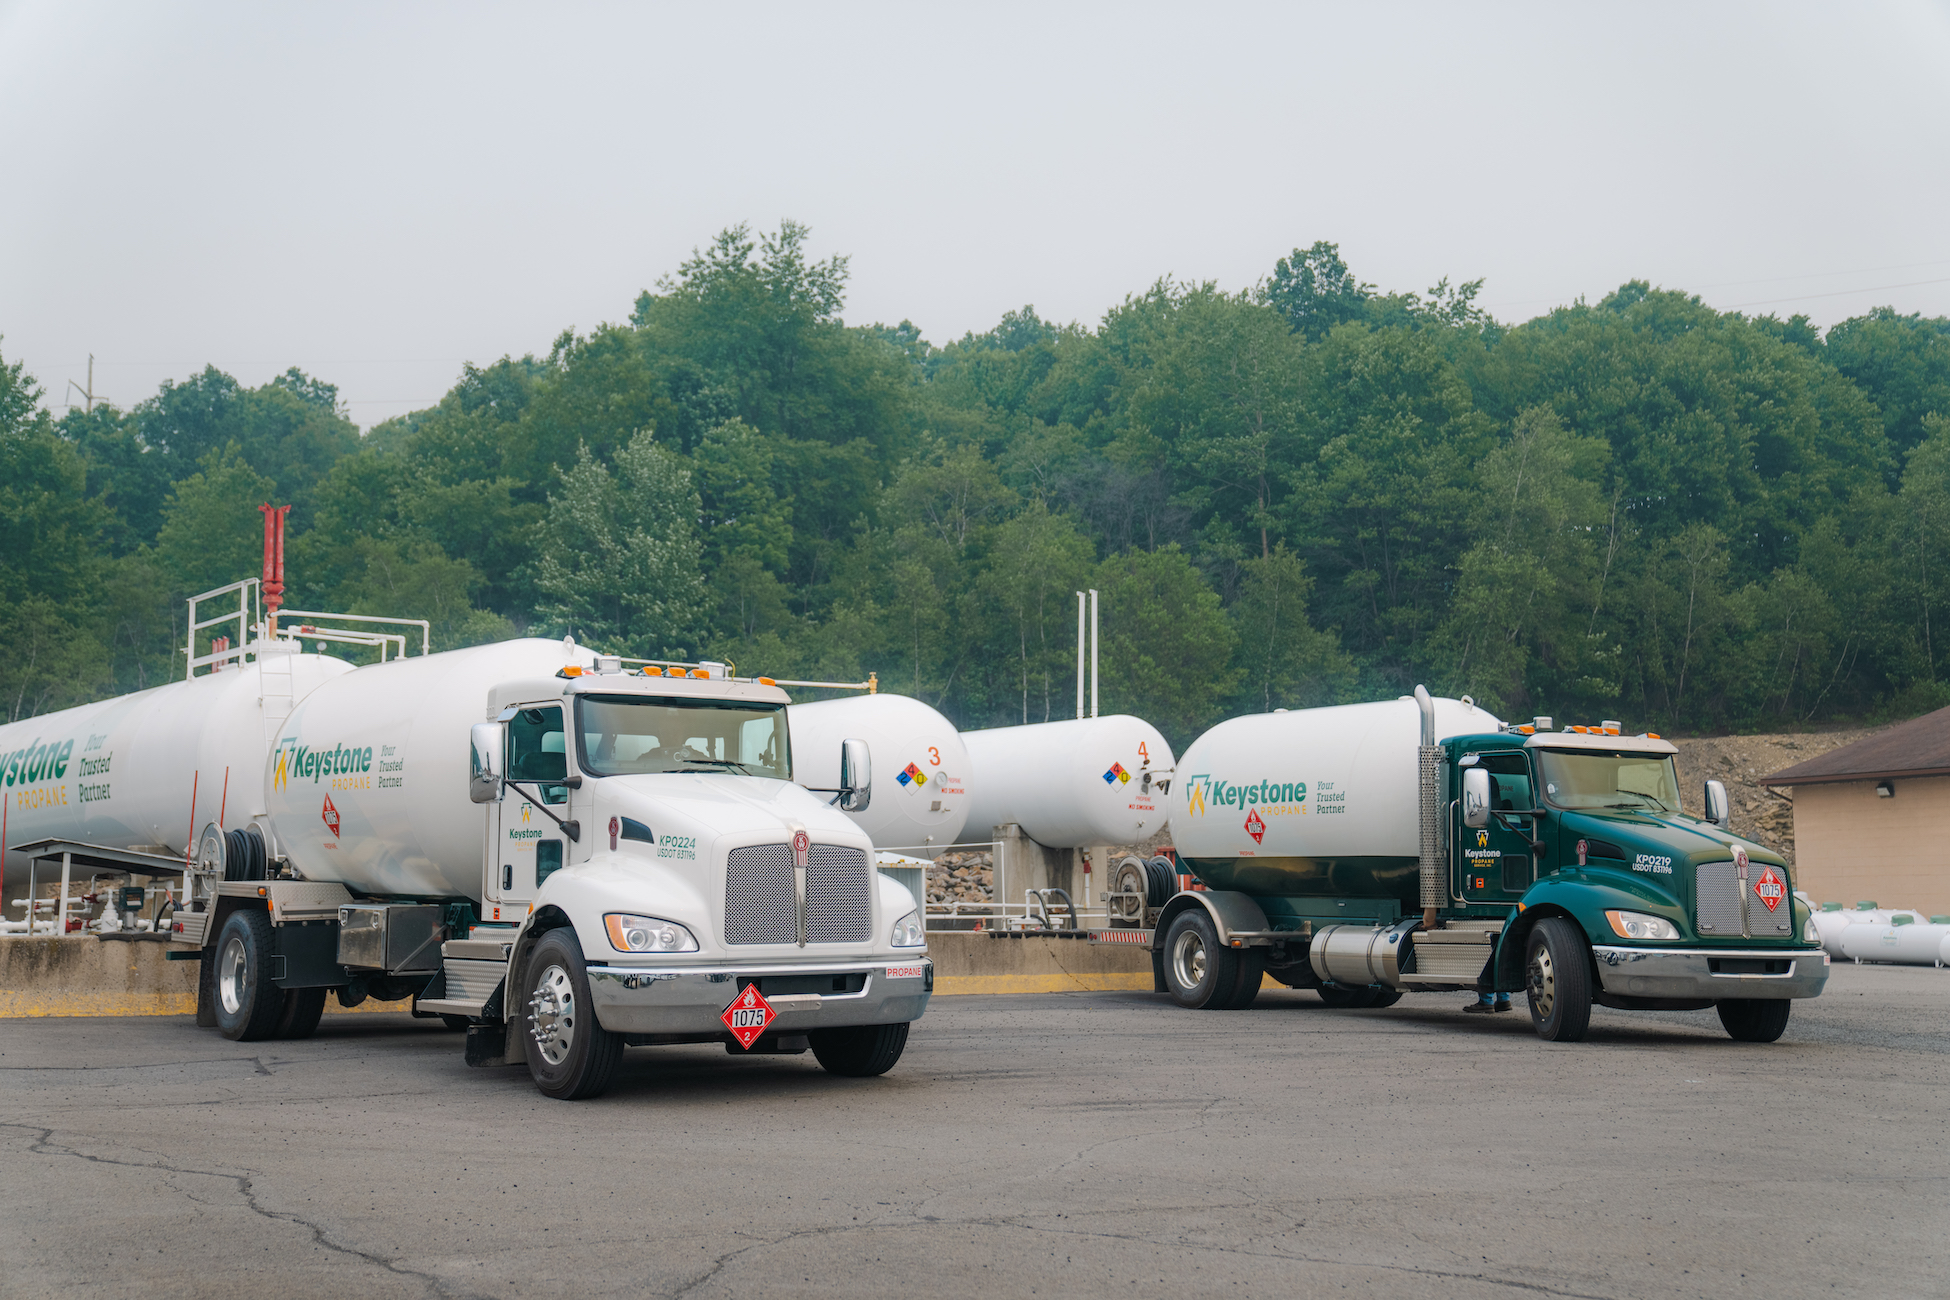 2 Propane trucks parked in front of large storage tanks